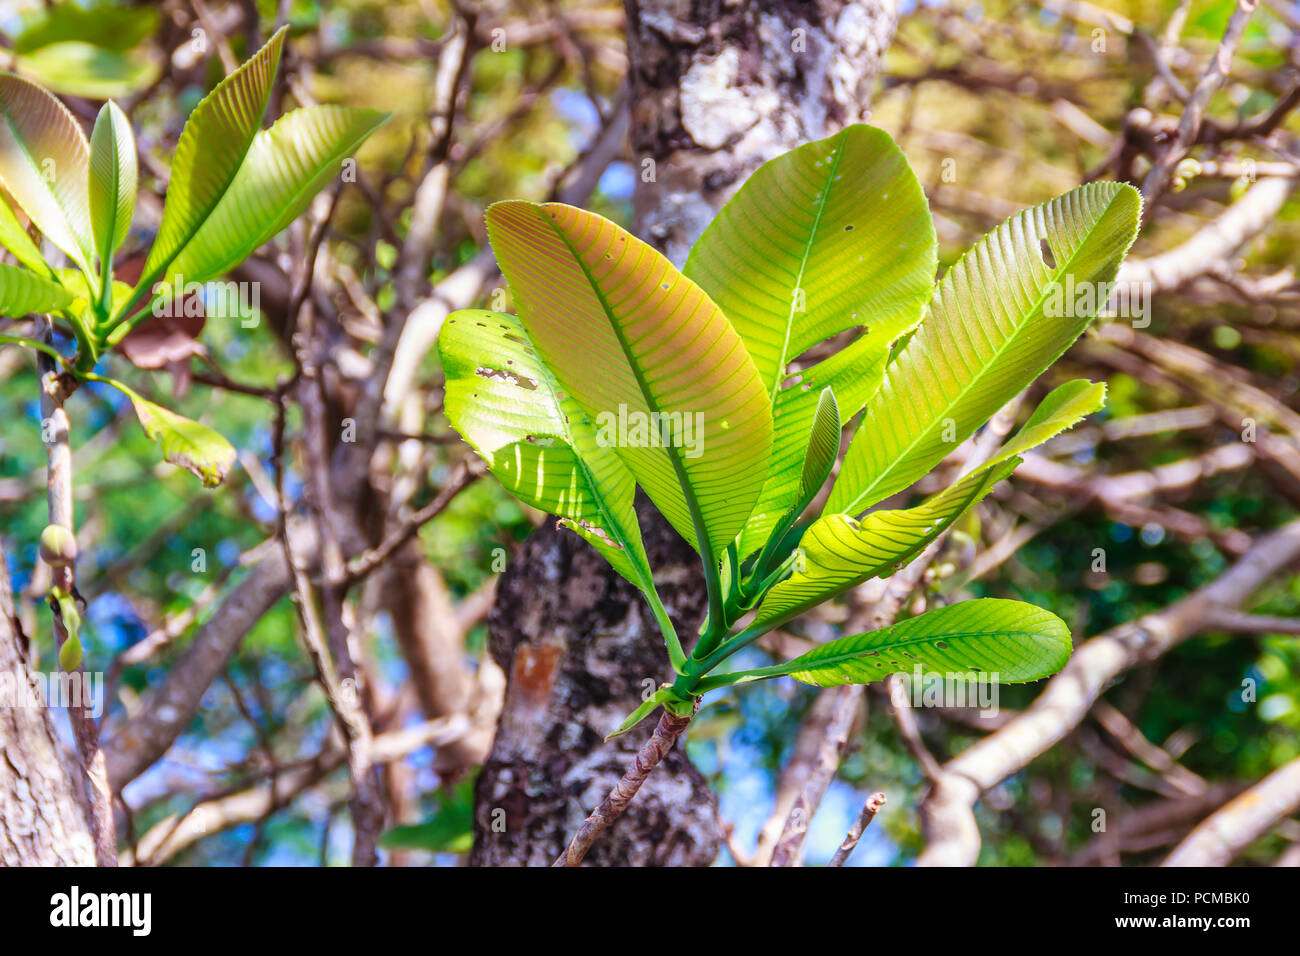 Young green leaves of great elephant apple tree, or Dillenia obovata (Blume) Hoogland. Stock Photo